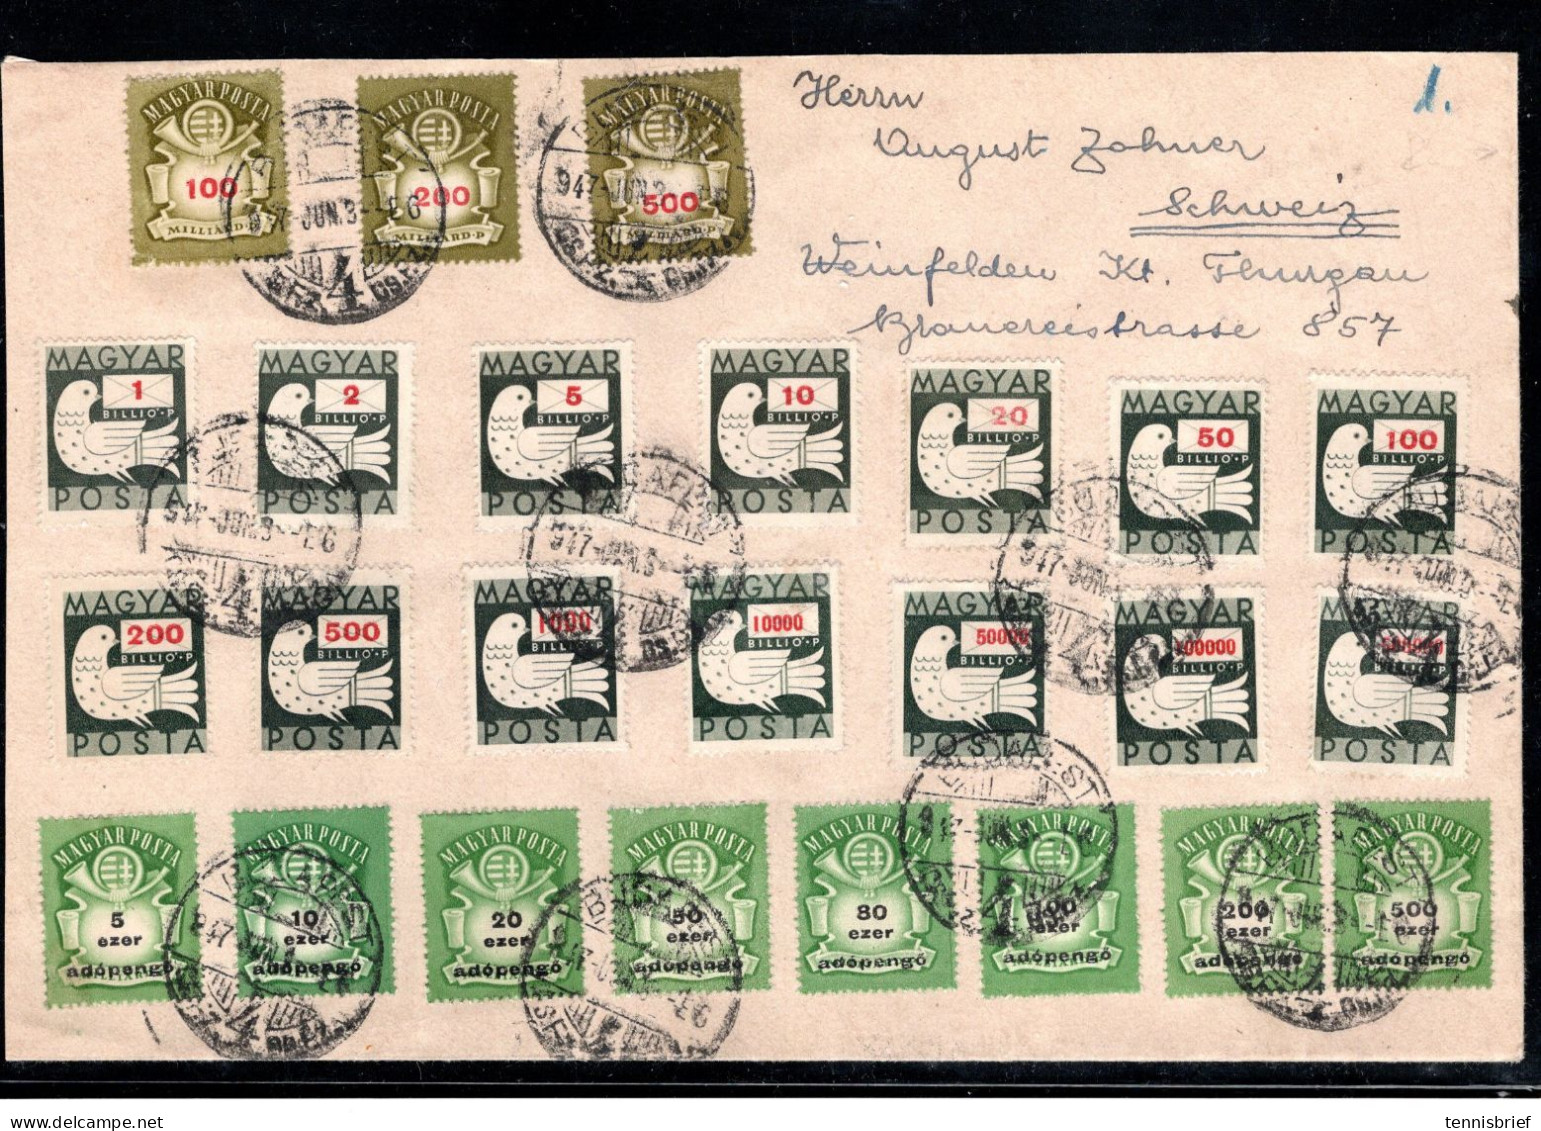 1947 , Inflation Cover , Set Franking , High Values , Cover To Switzerland , Rare On Cover !! # 1495 - Storia Postale